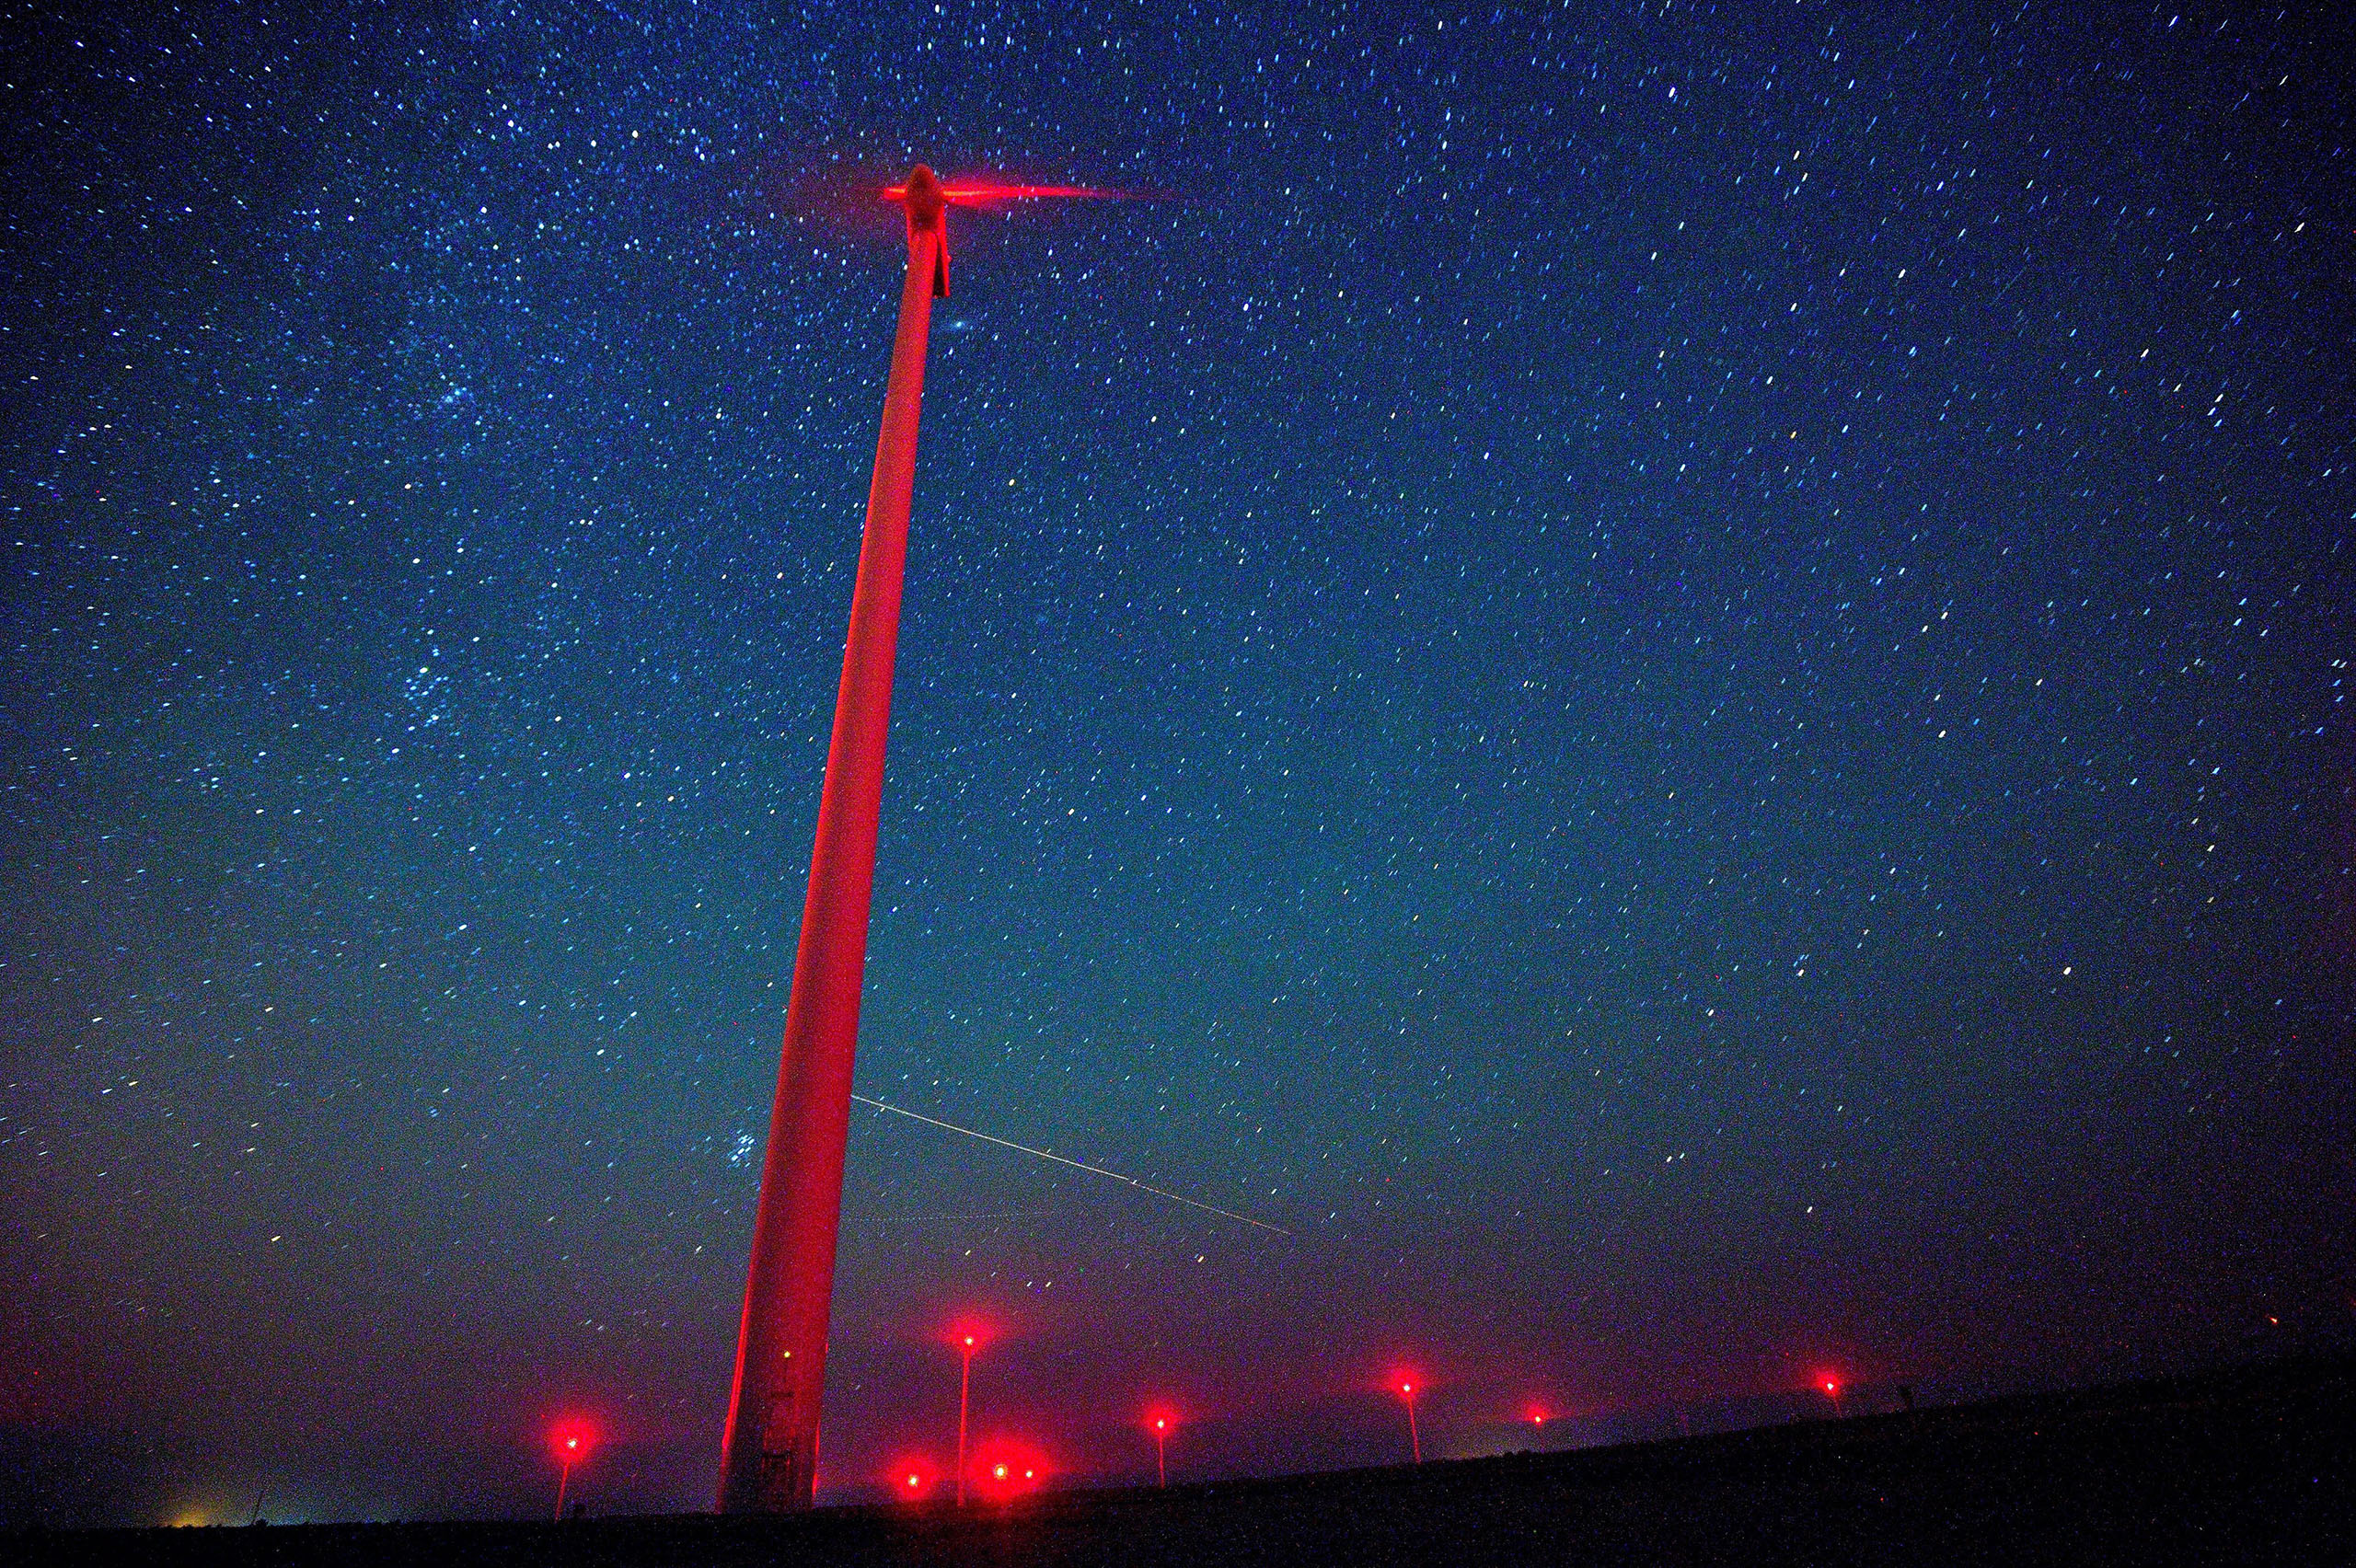 A view of meteors lighting up the night sky above a wind turbine at 'Saint Nikola' wind park near the Kavarna, some 500km from Sofia, Bulgaria, Aug. 12, 2016.